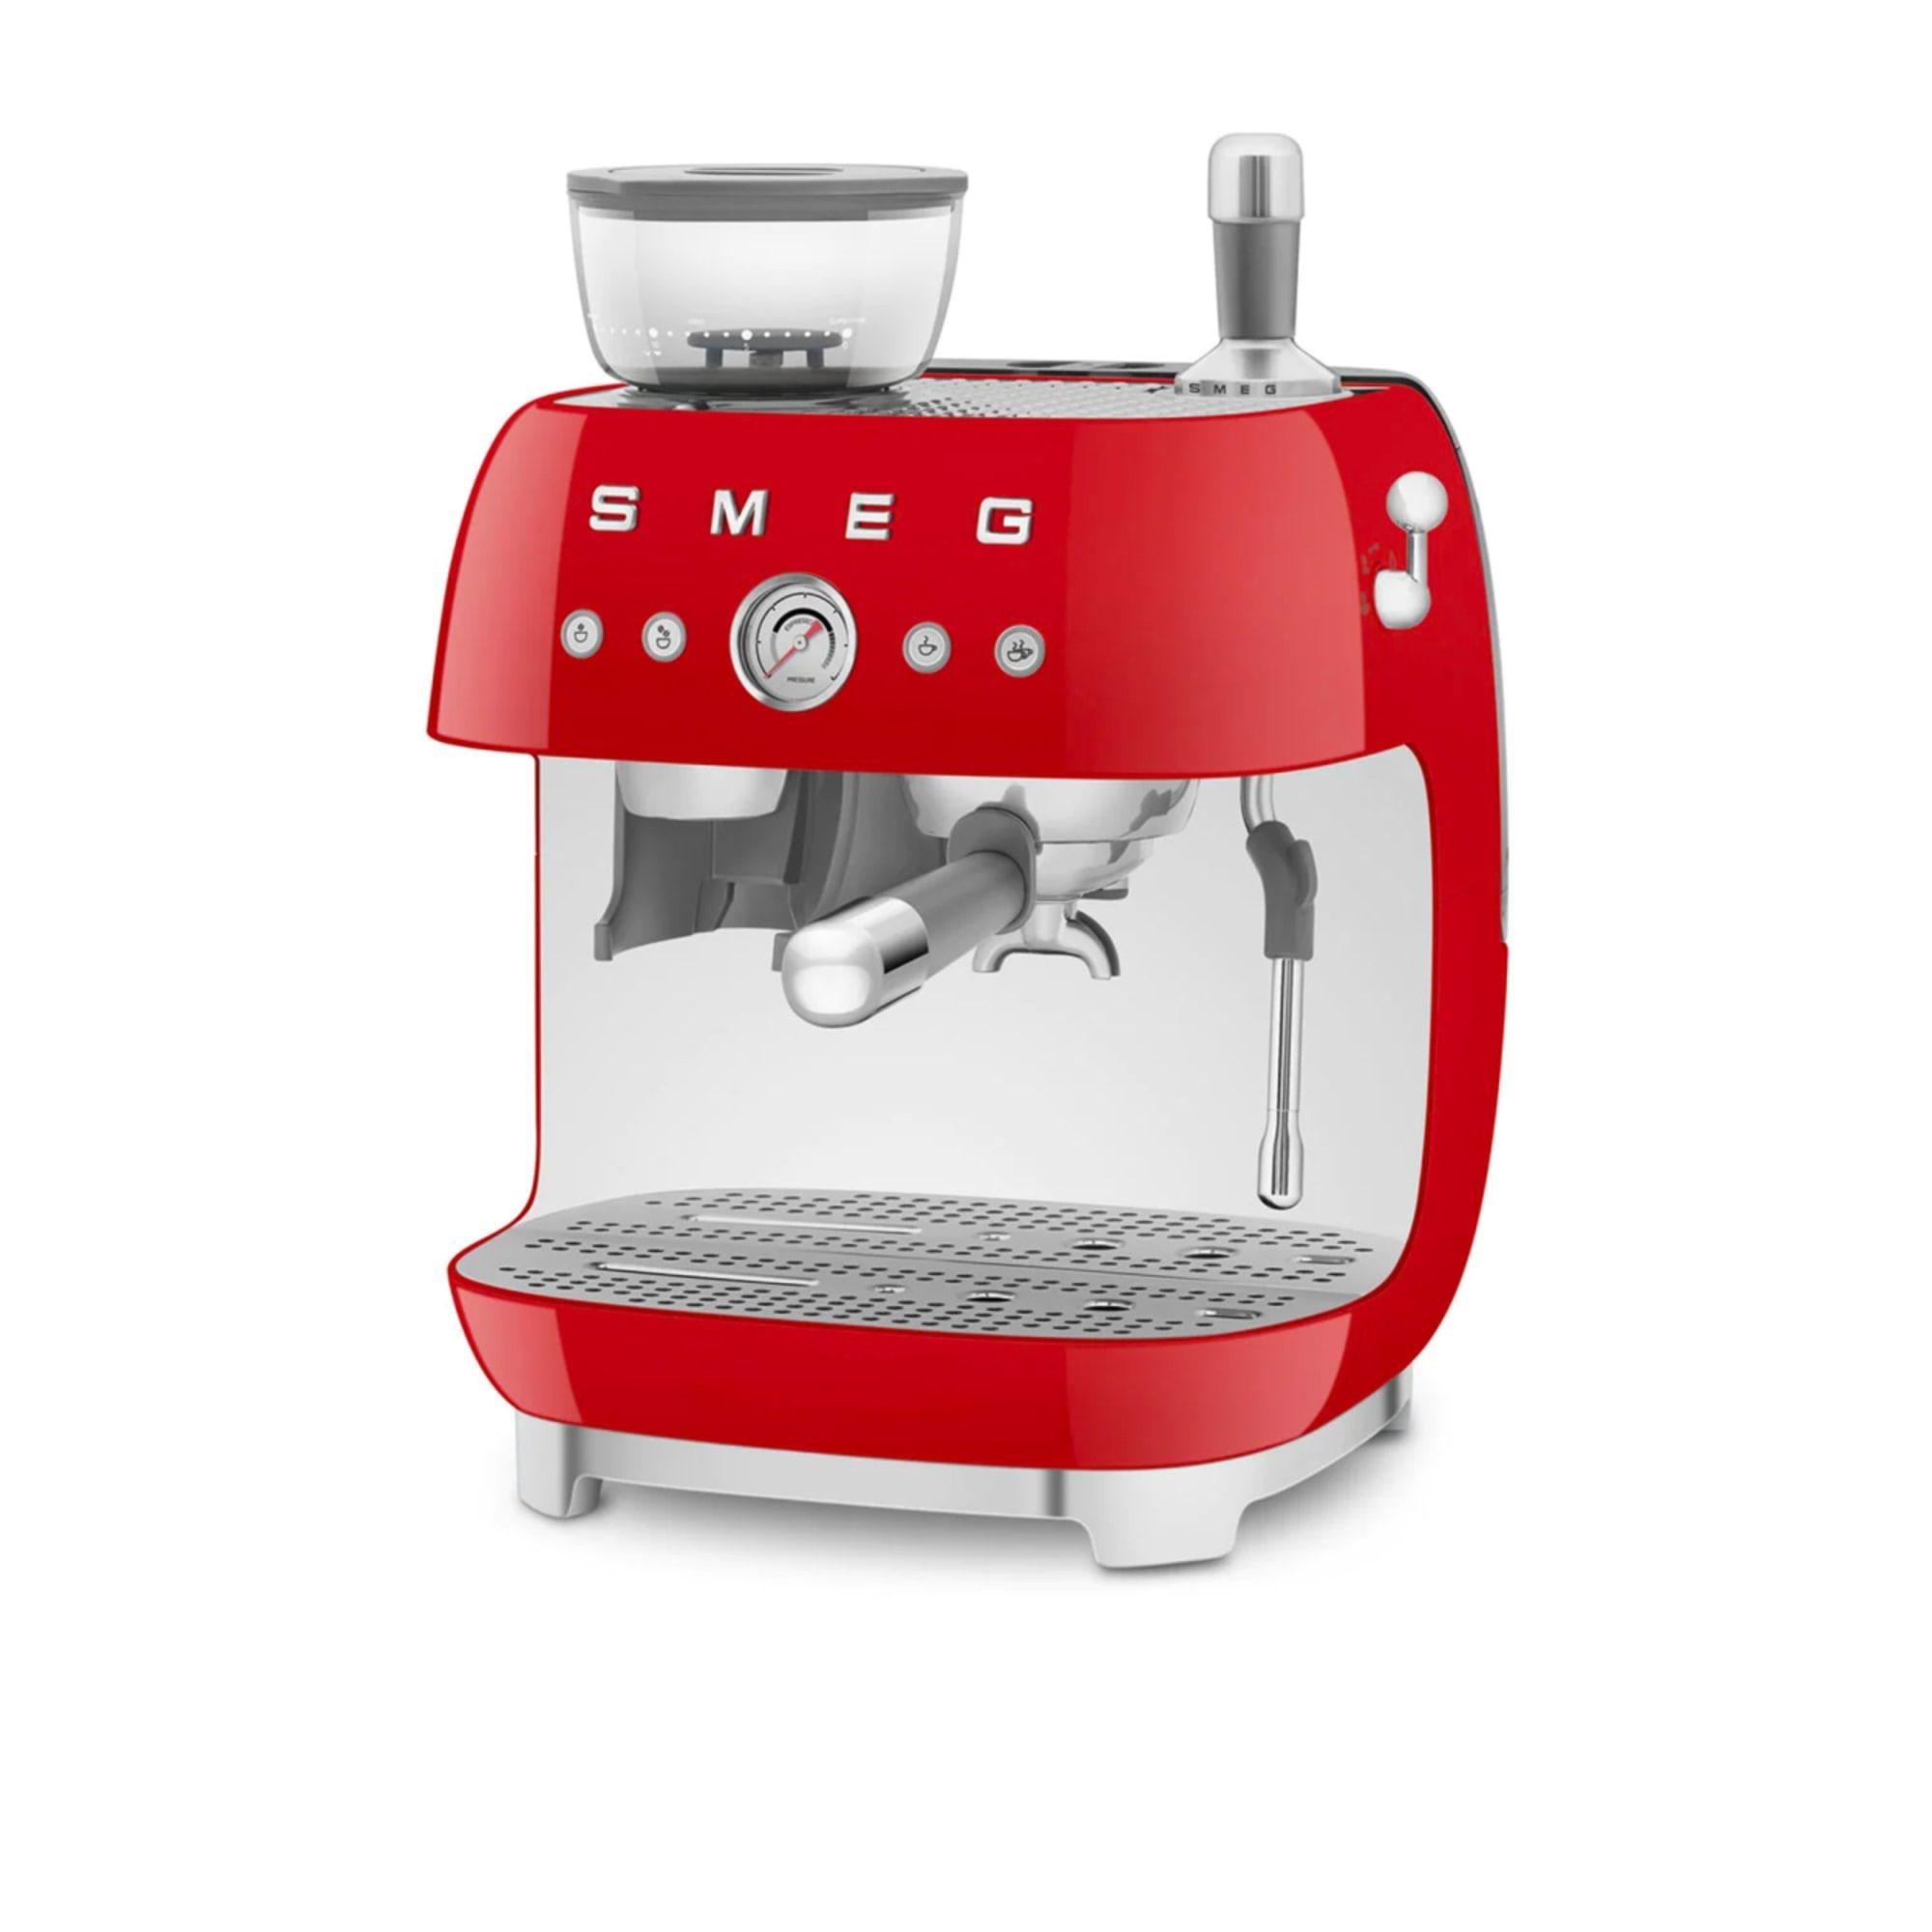 Smeg 50's Retro Style Espresso Machine with Built In Grinder Red Image 4